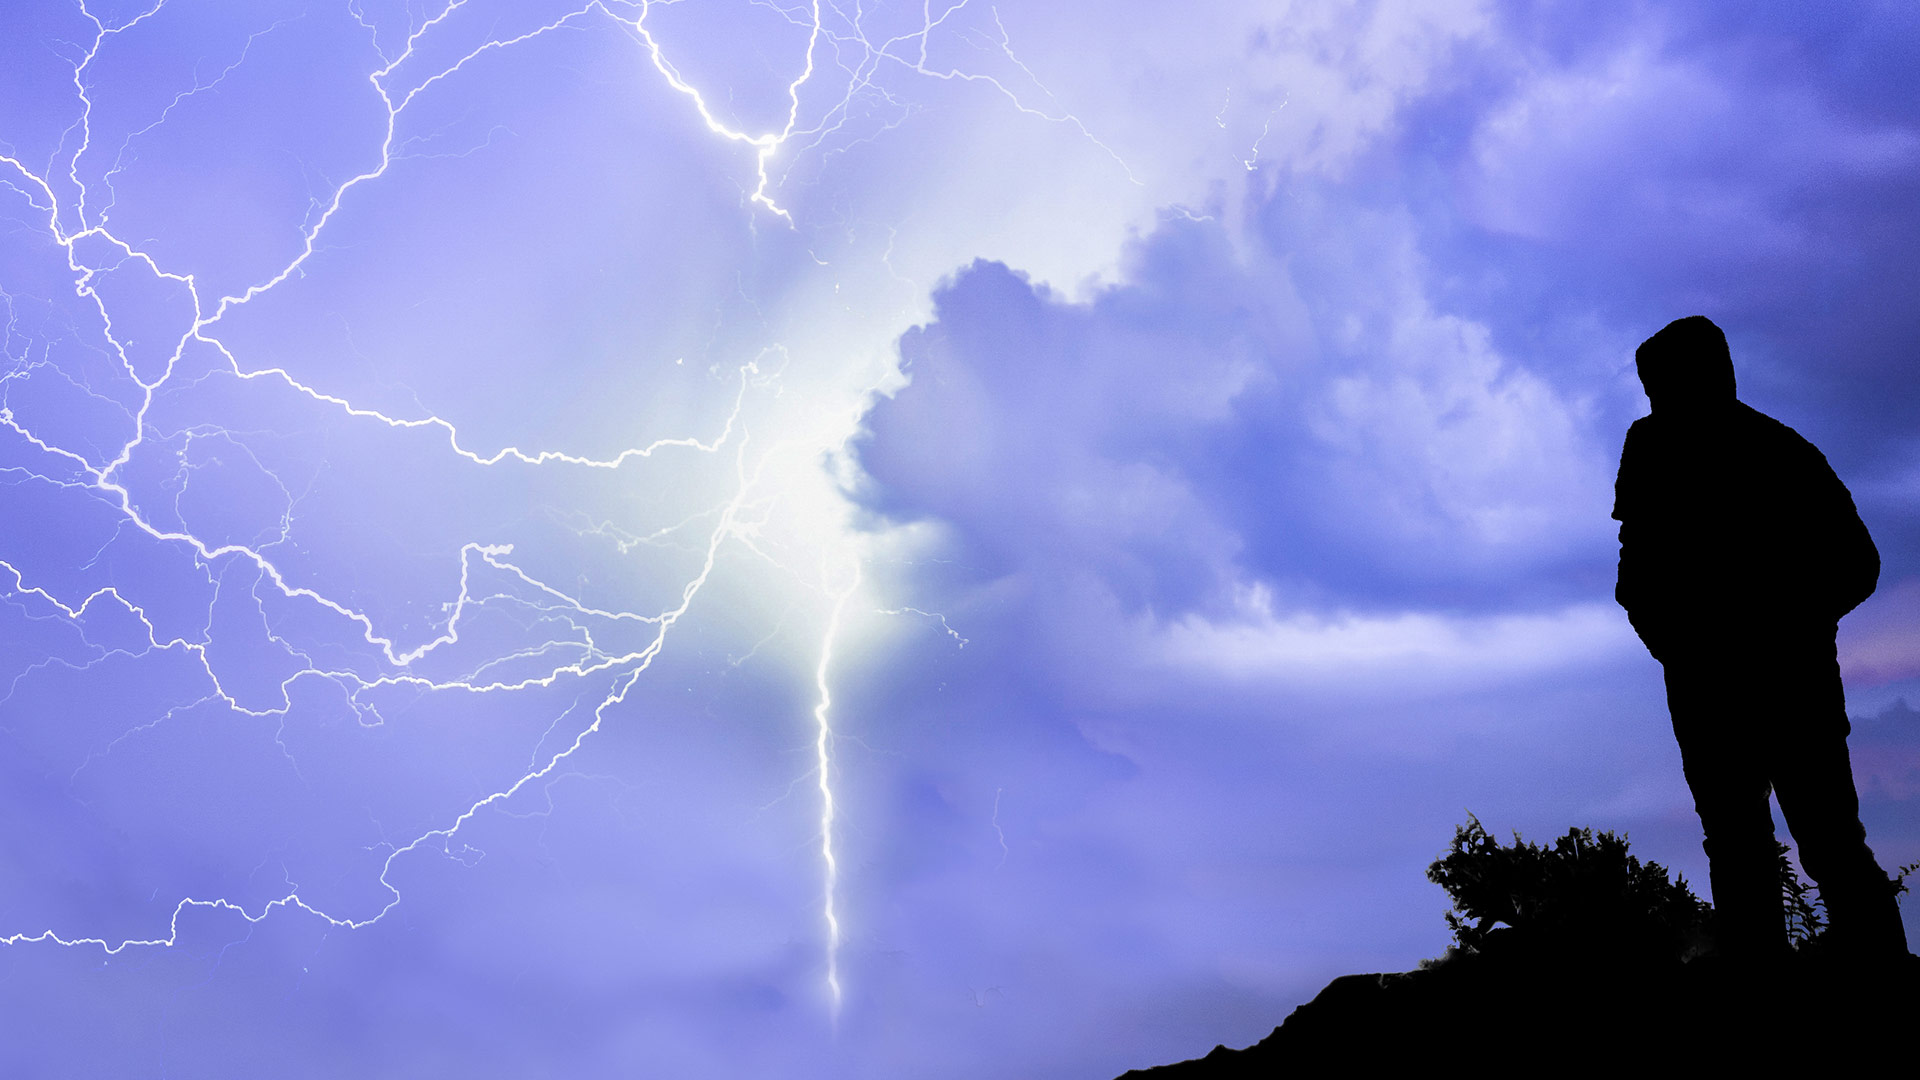 What Should I Do If I'm Outside During a Lightning Storm? - Health Beat